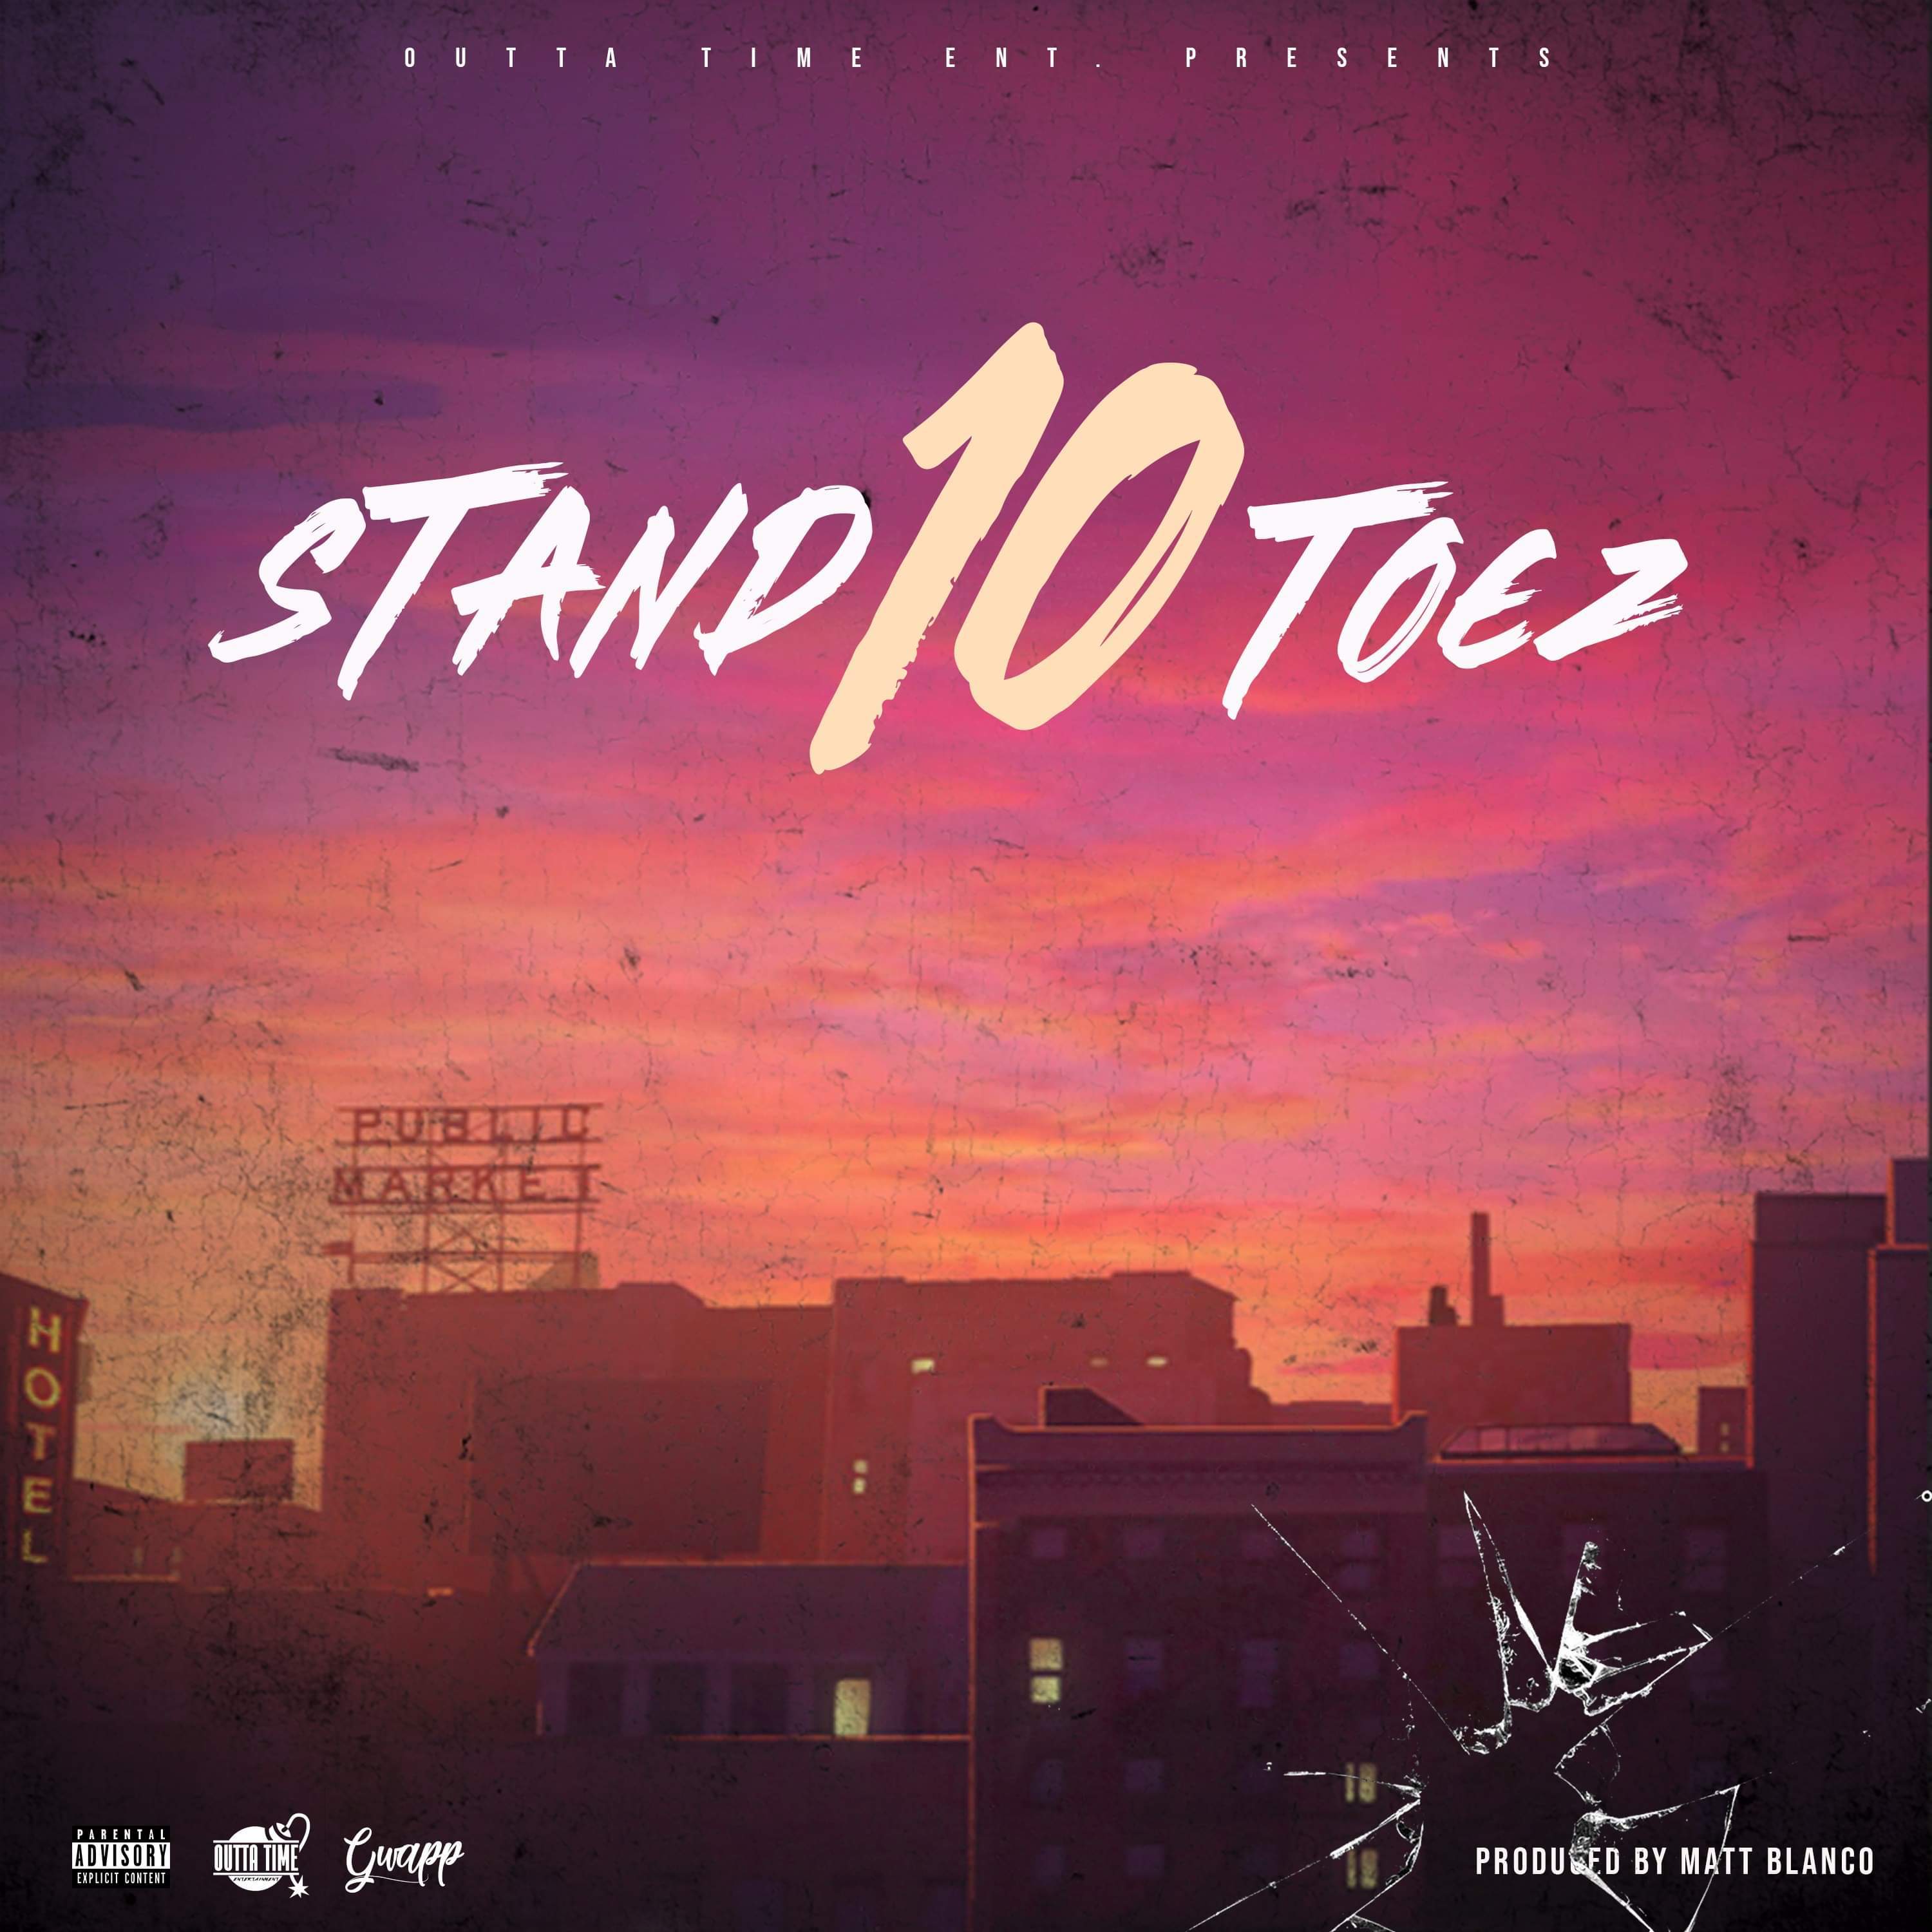 Stand 10 Toez